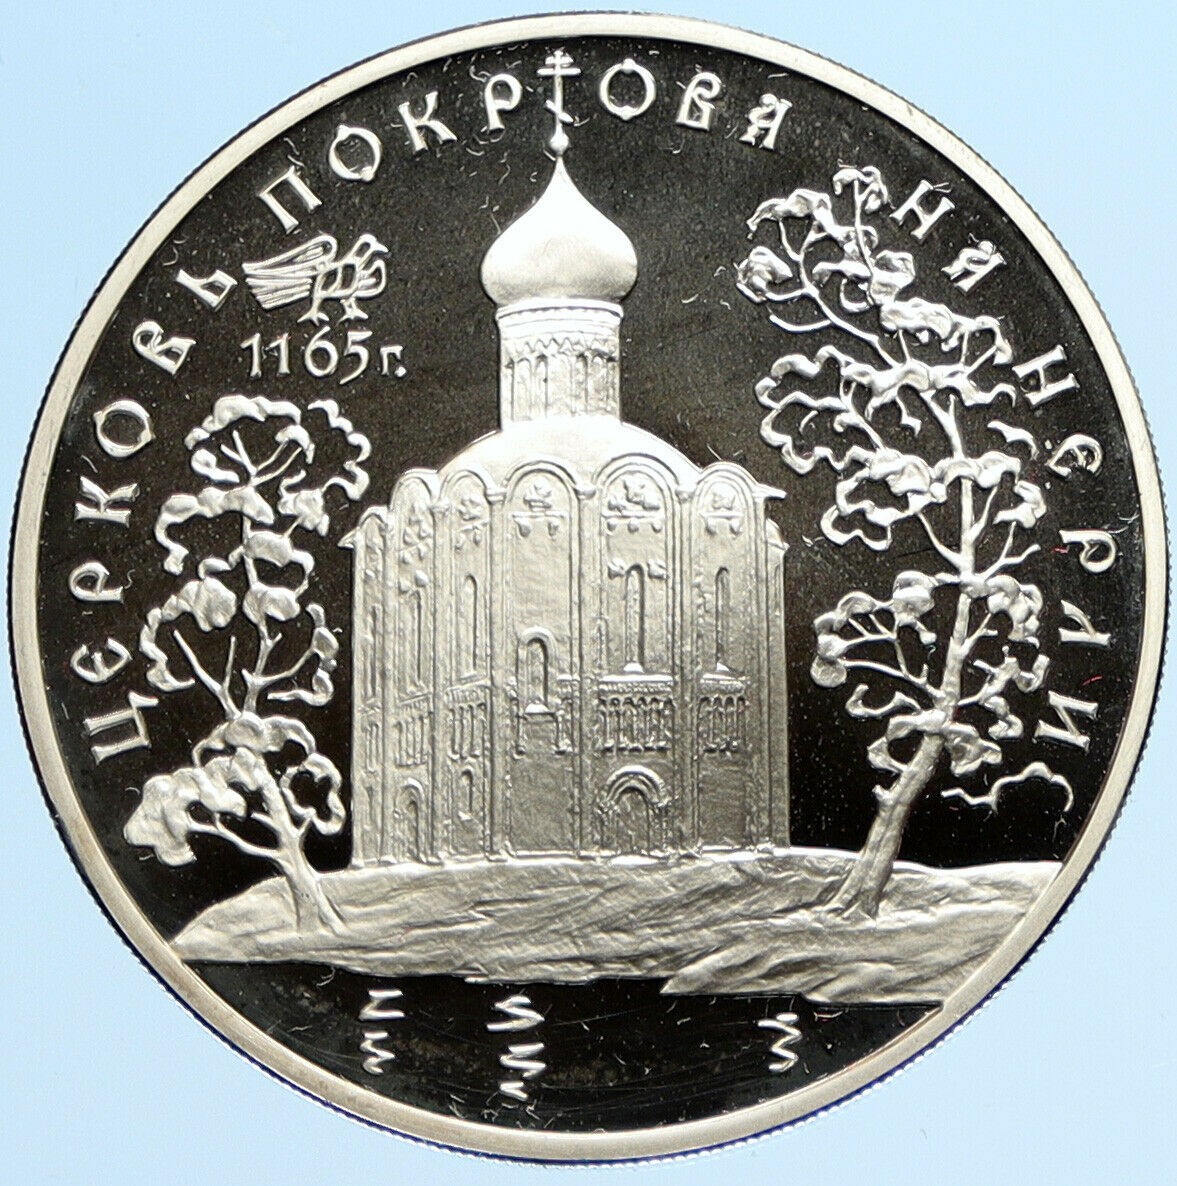 1994 RUSSIA Church of INTERCESSION Nerl River Proof Silver 3 Rouble Coin i97710